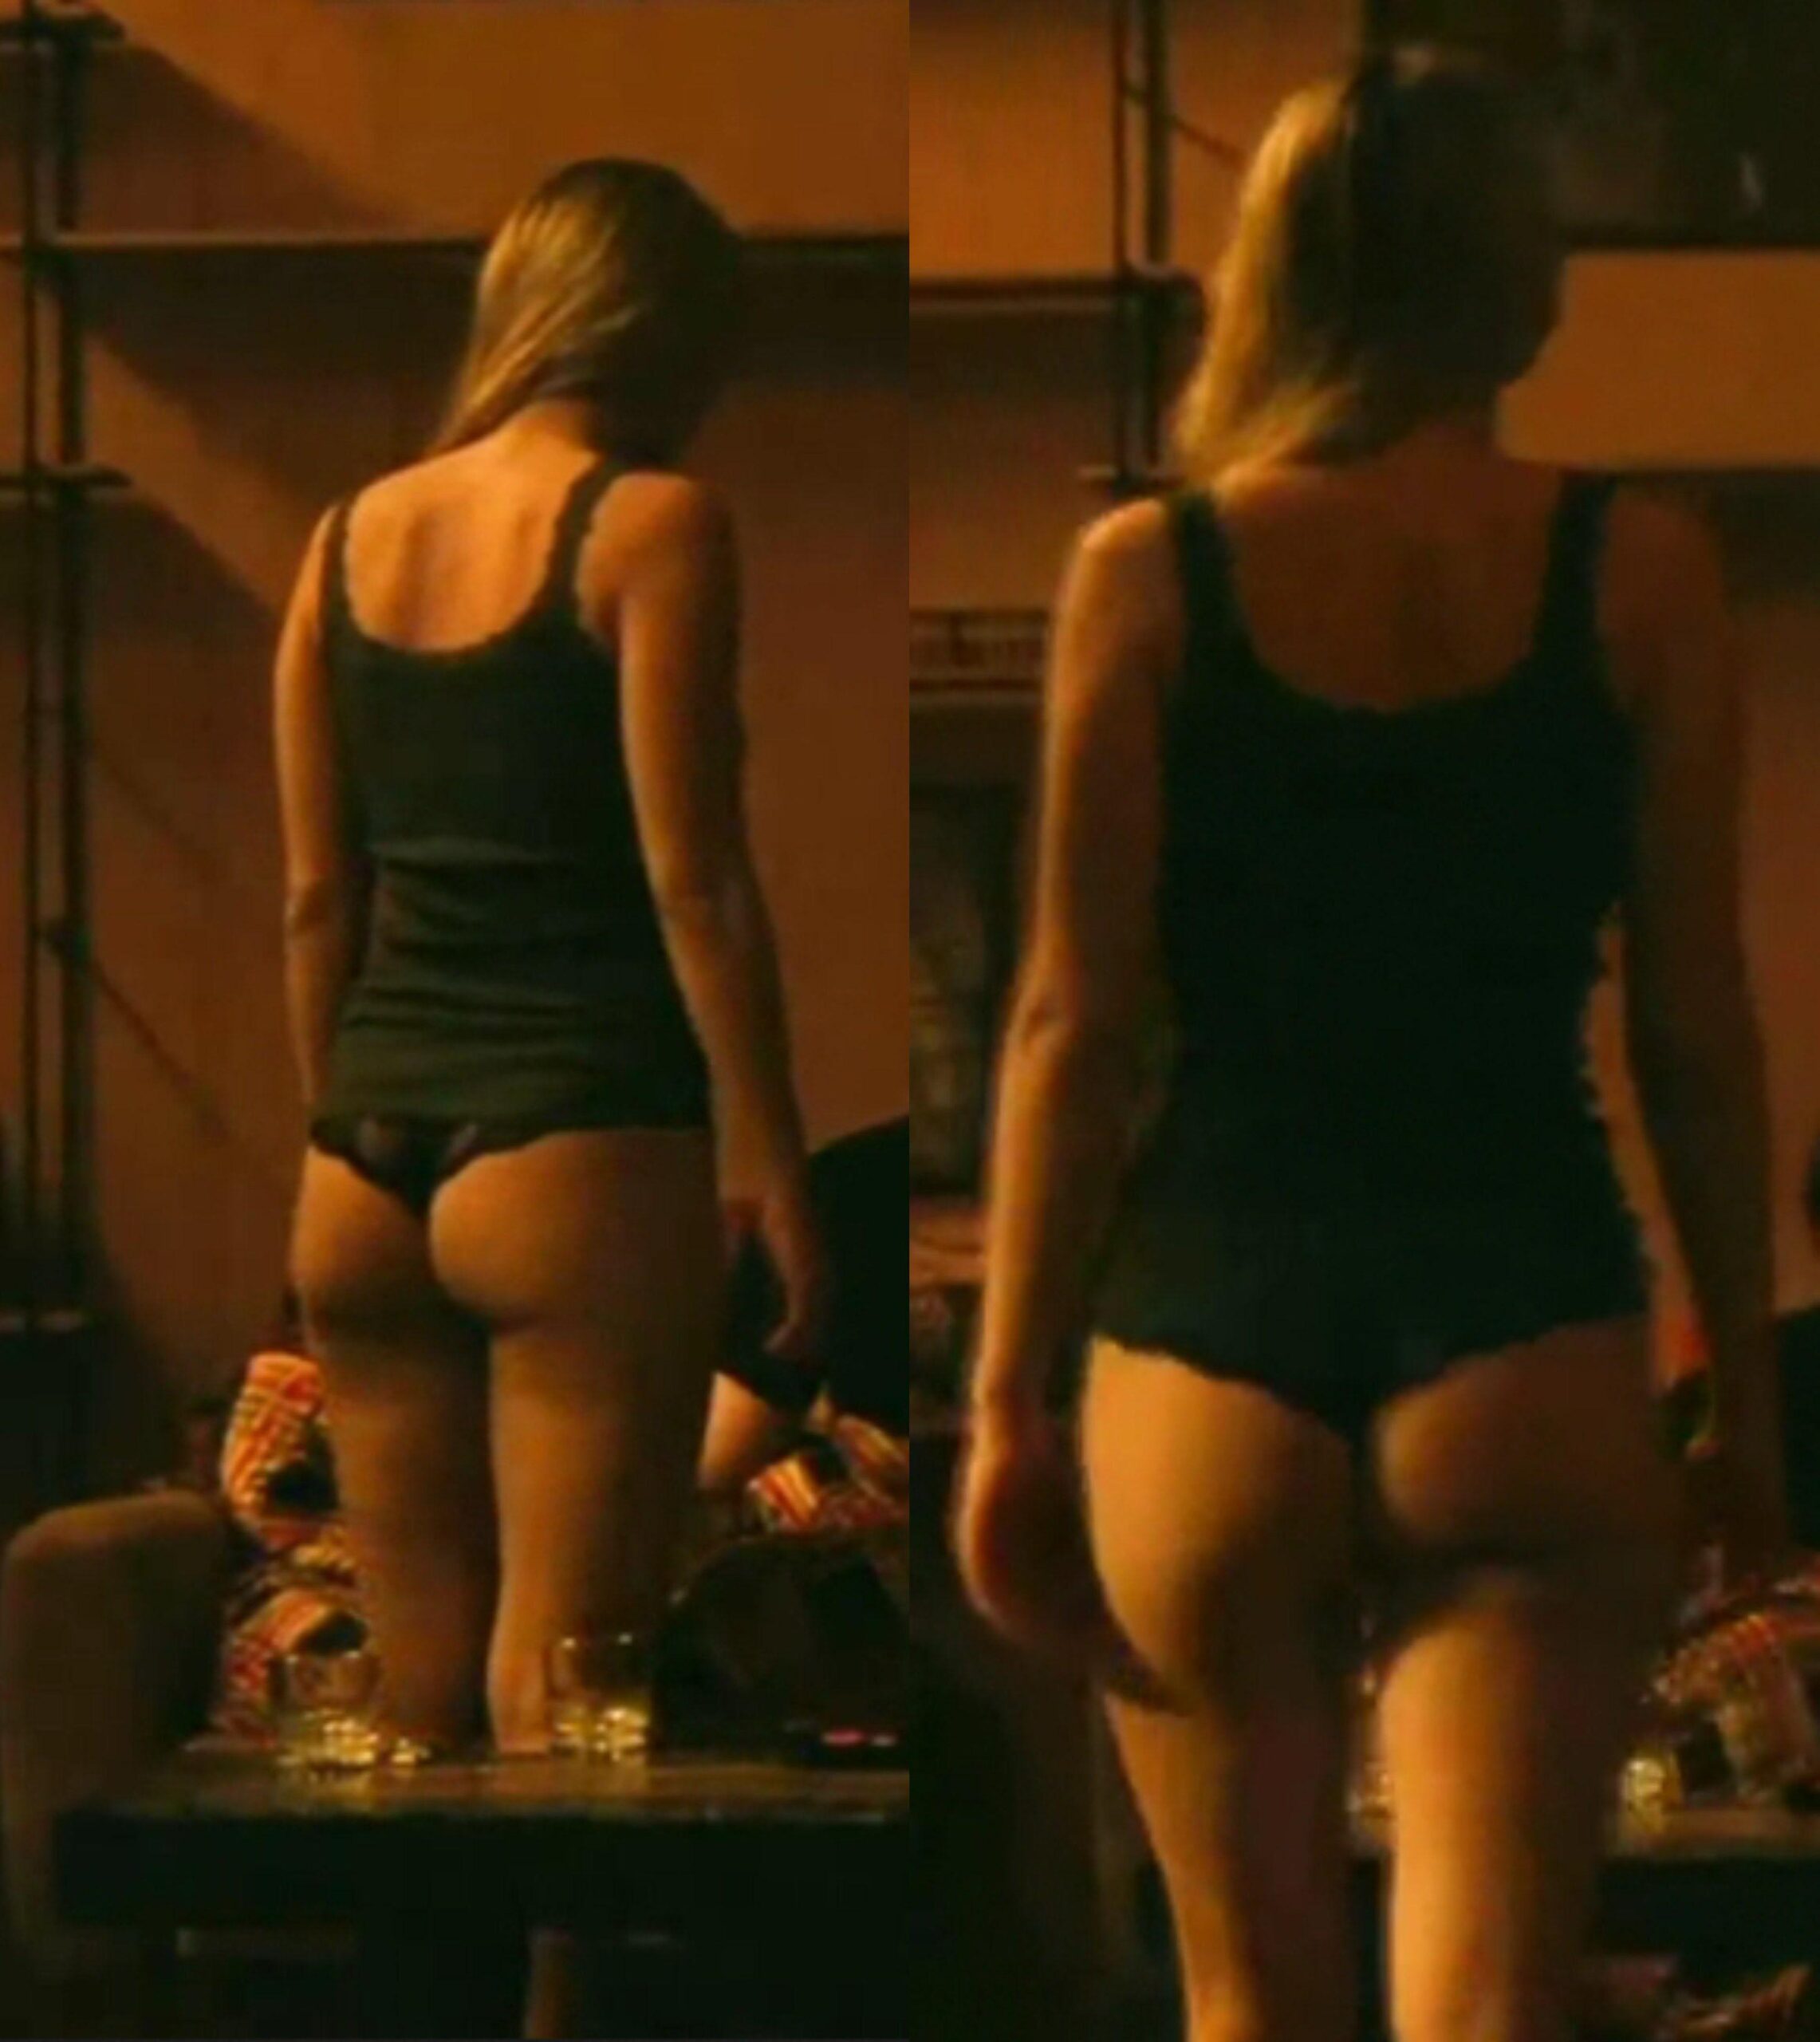 I could stare at Jennifer Lawrences ass all day.